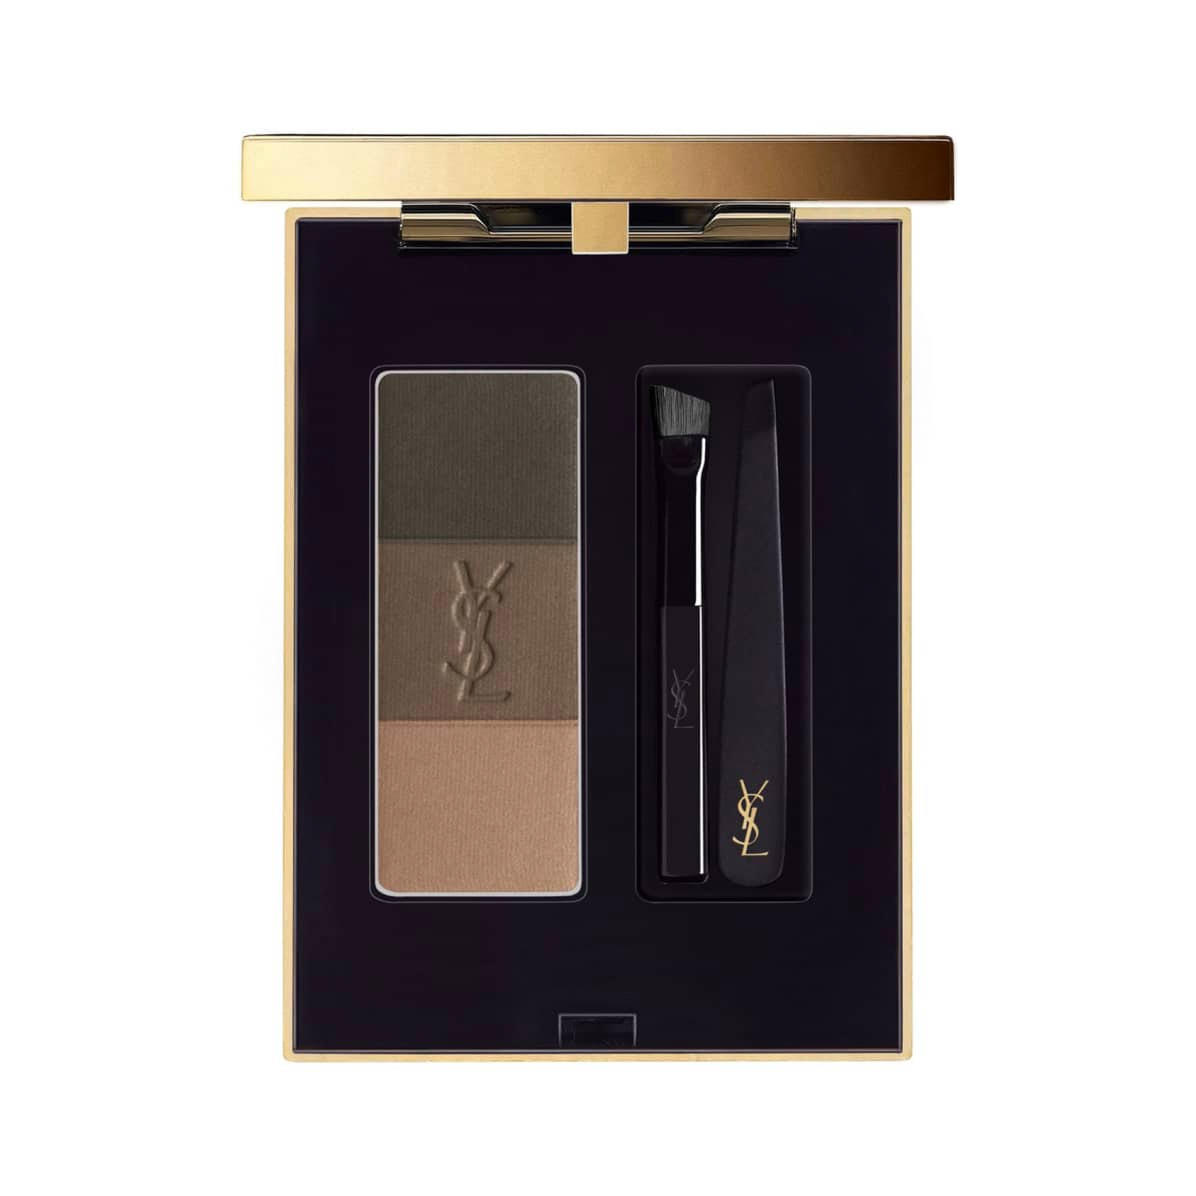 YSL Couture Brow Palette 2